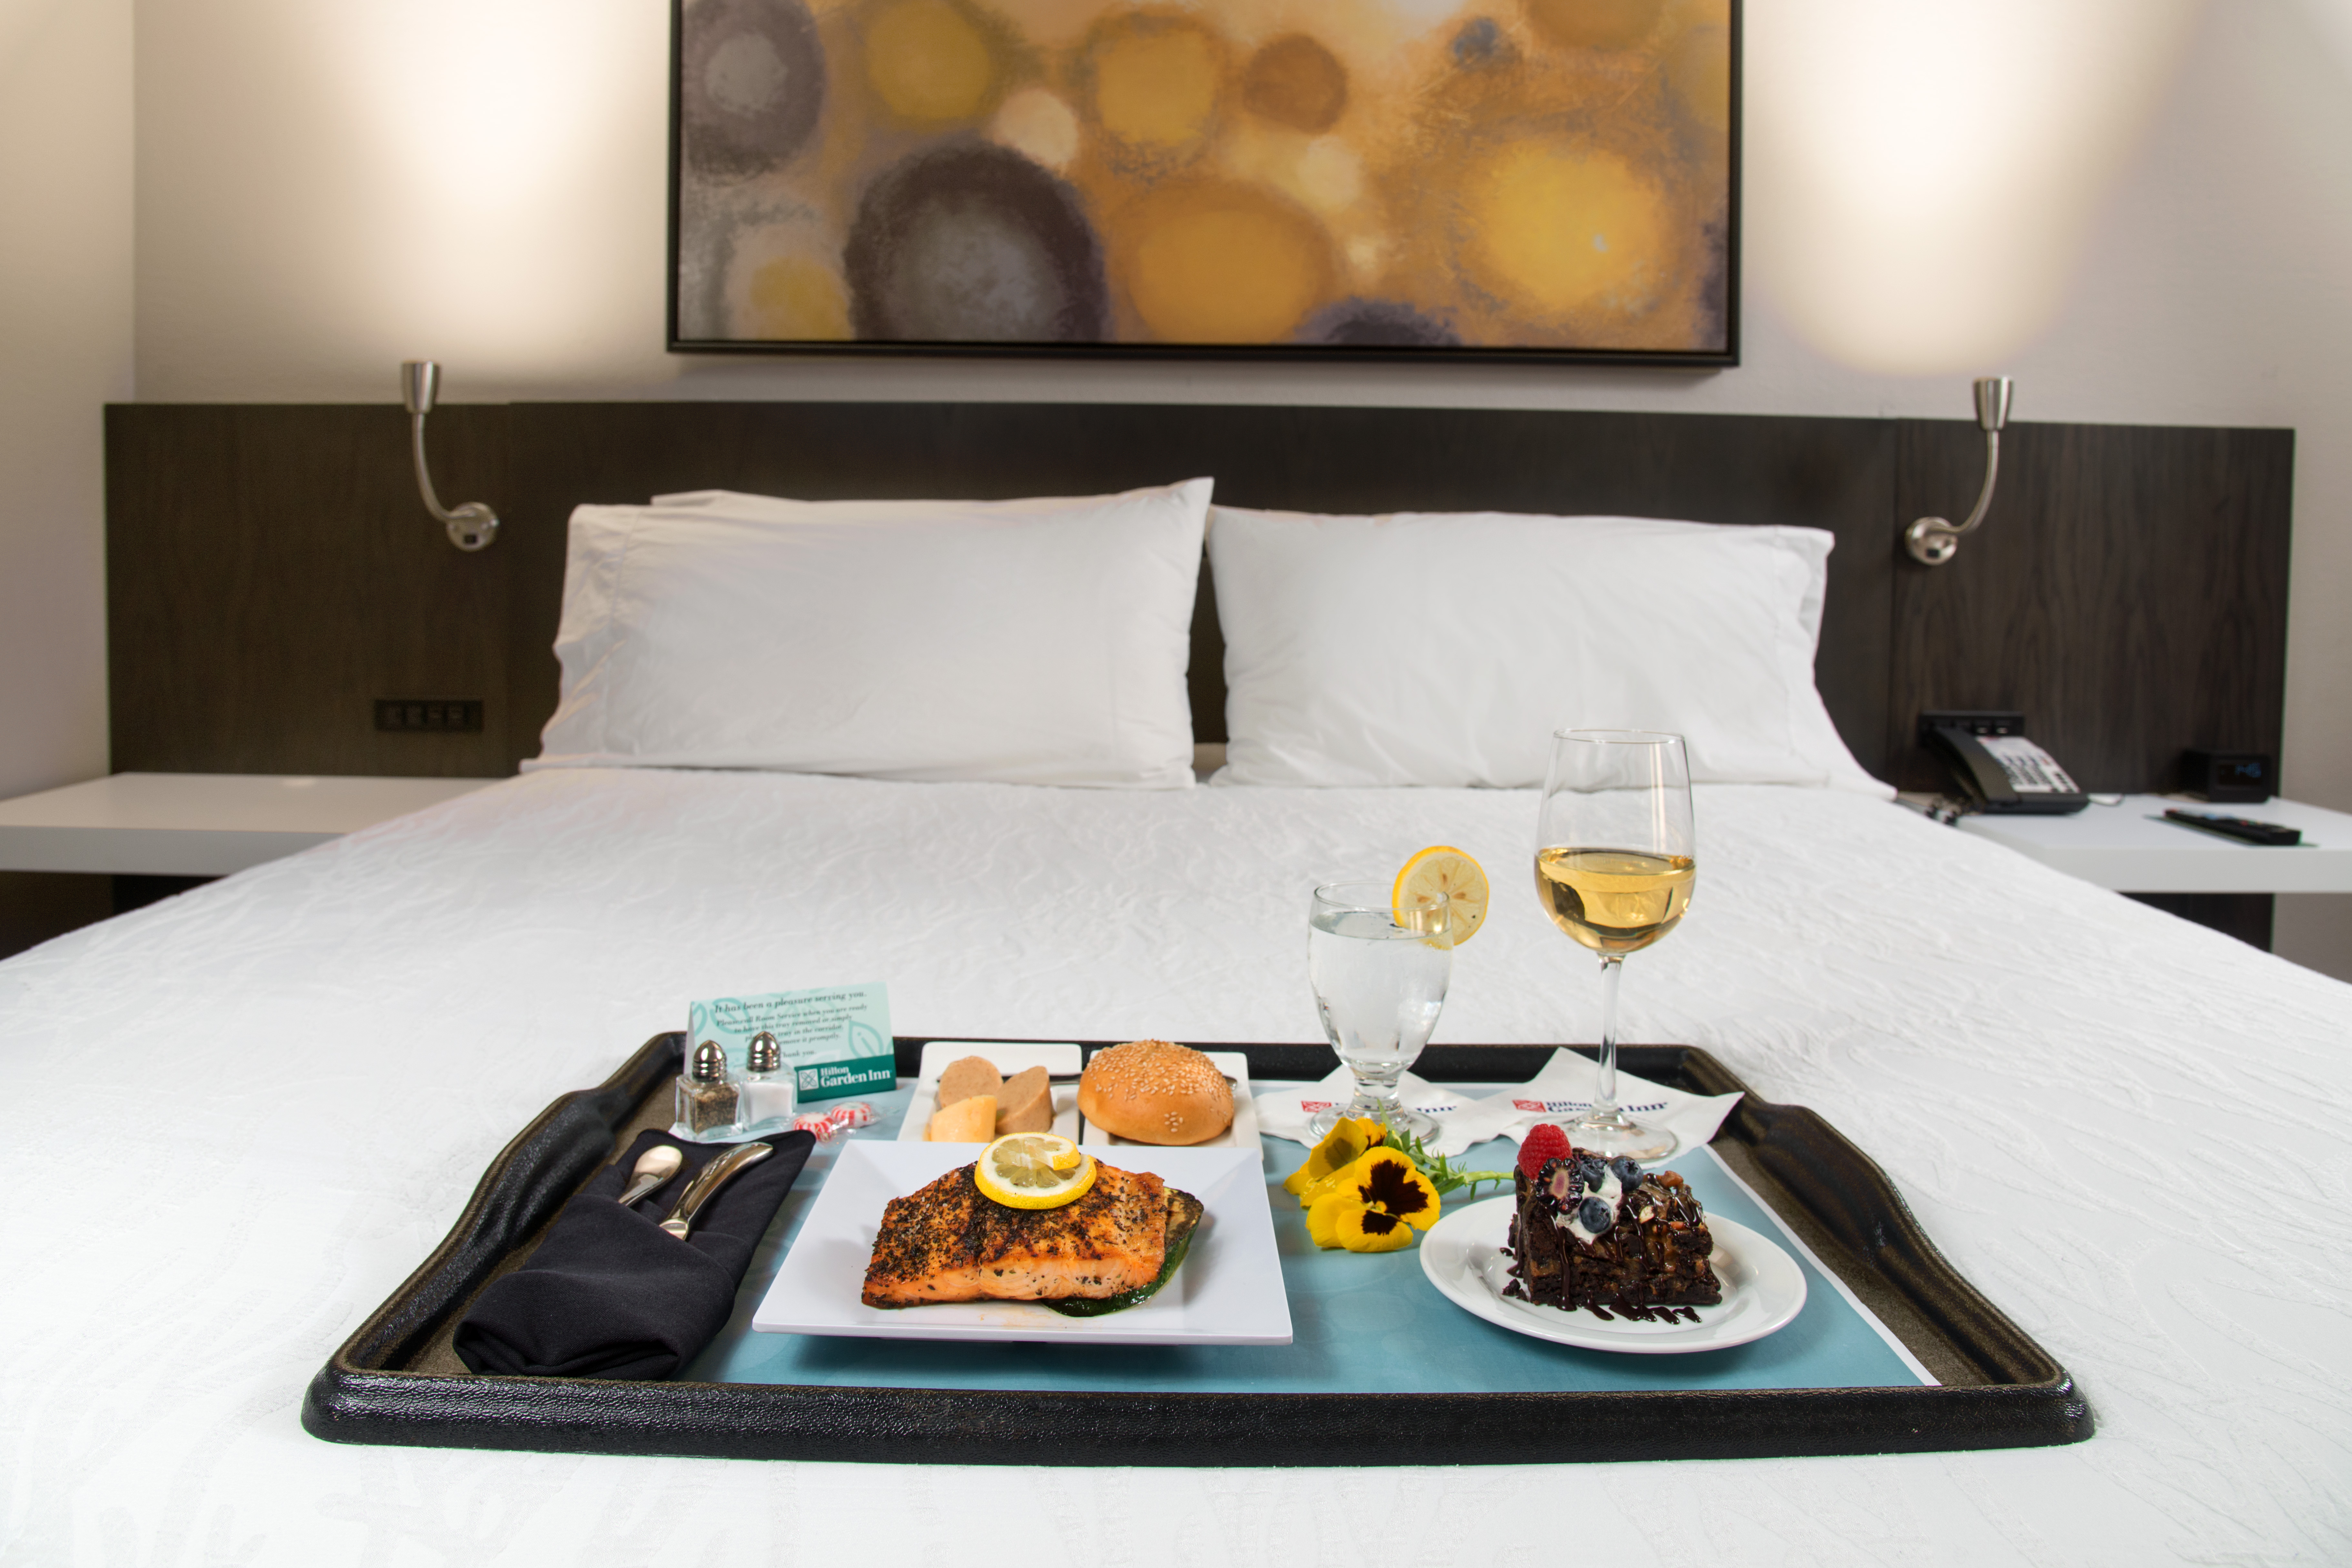 Room Service Food Tray on Bed